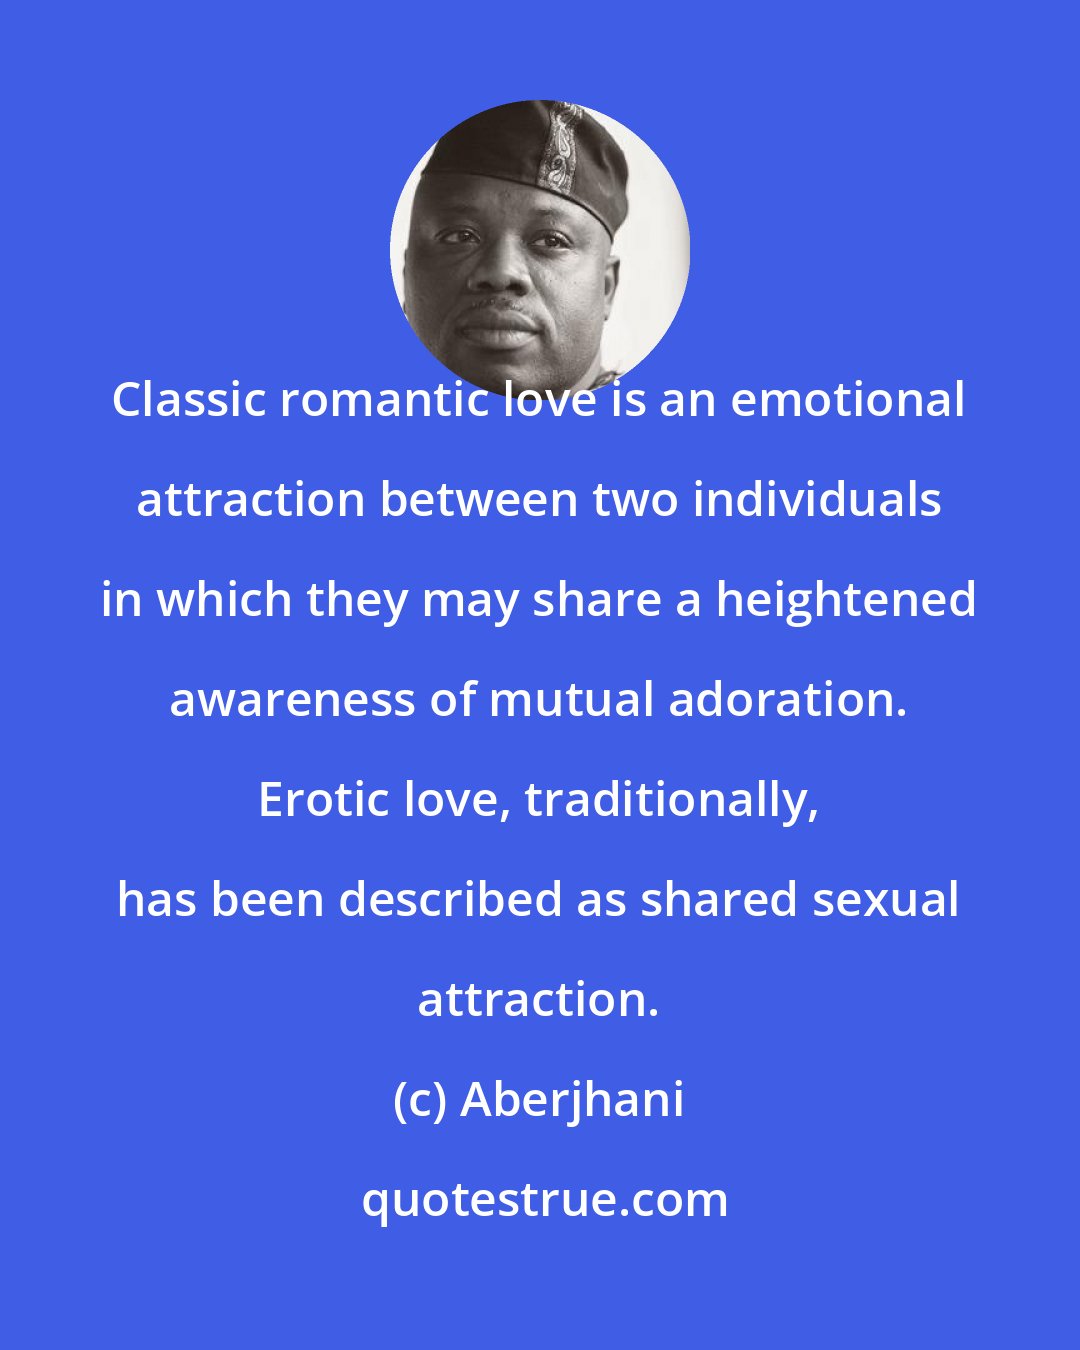 Aberjhani: Classic romantic love is an emotional attraction between two individuals in which they may share a heightened awareness of mutual adoration. Erotic love, traditionally, has been described as shared sexual attraction.